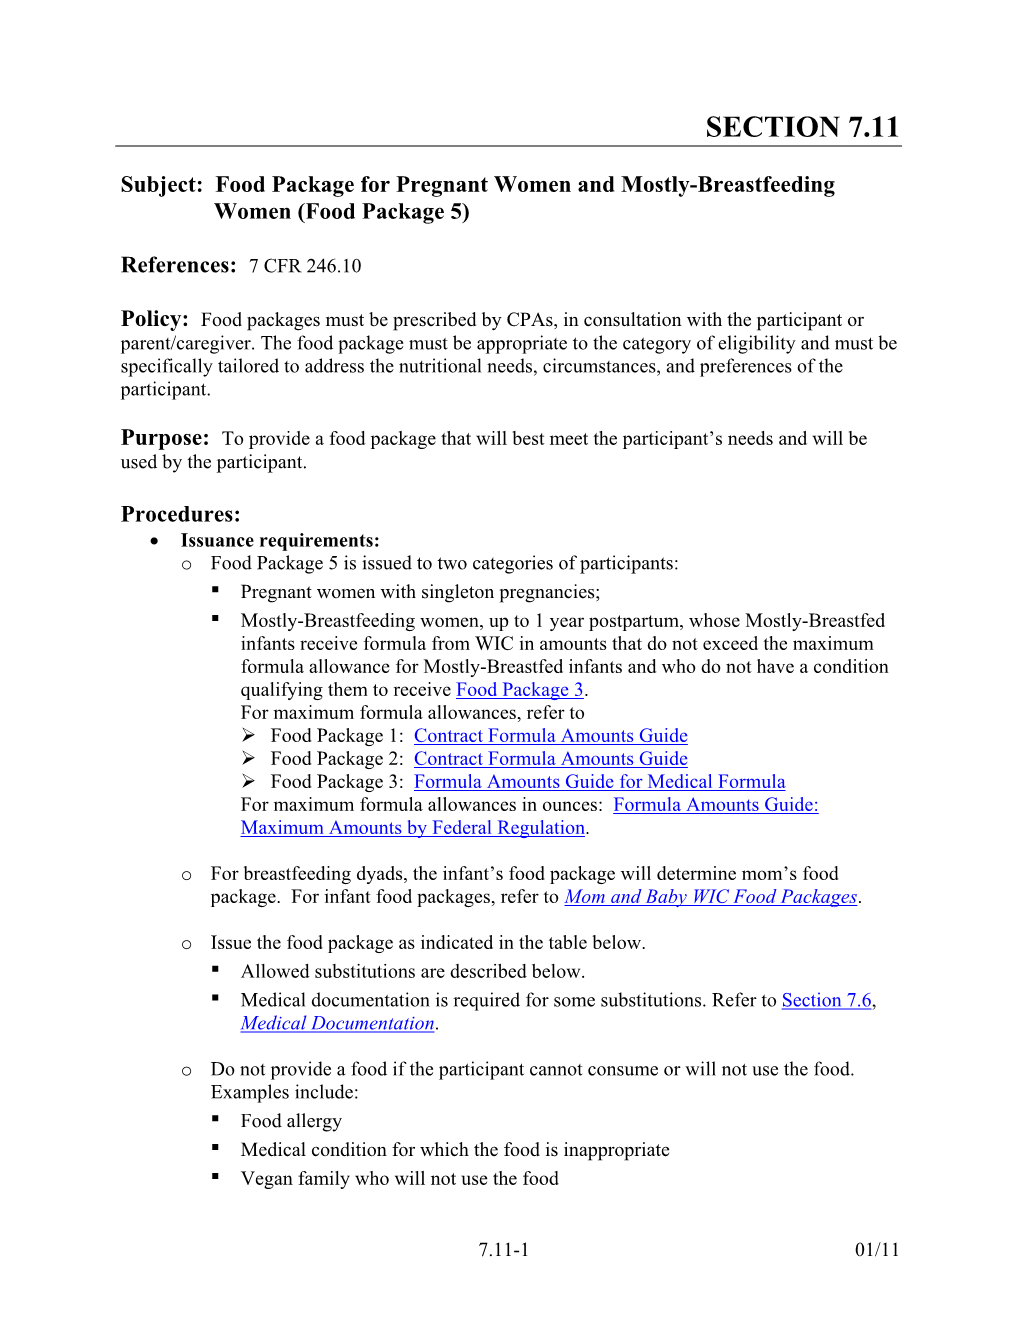 Food Package 5: Pregnant and Mostly-Breastfeeding Women